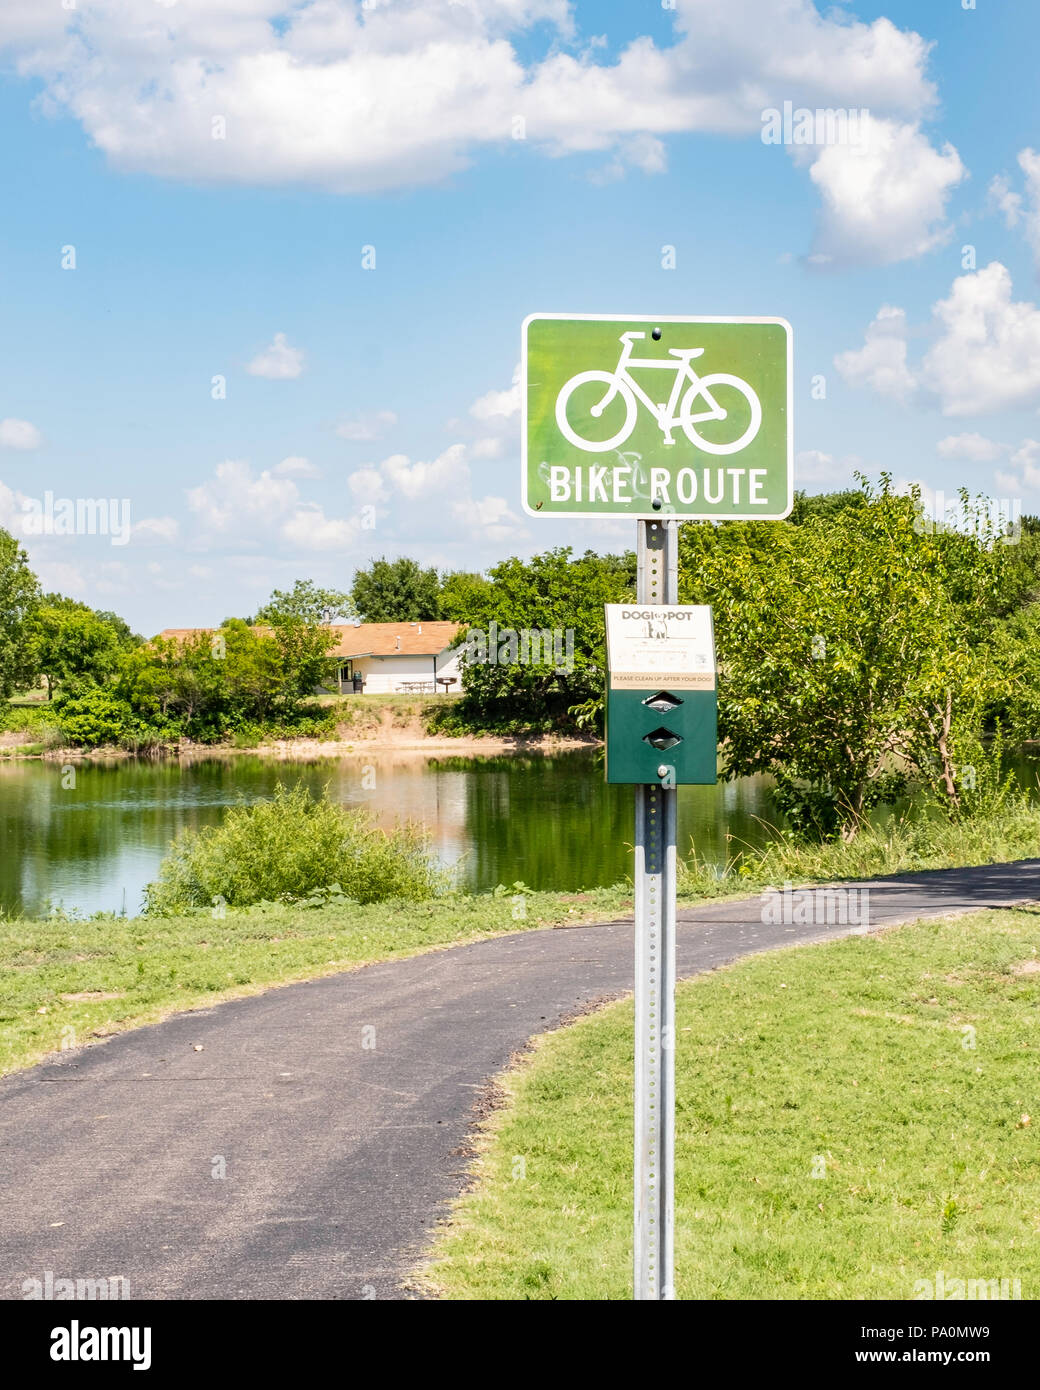 A bike route sign by a path and pond in Sedgwick county park, Wichita, Kansas, USA. Stock Photo